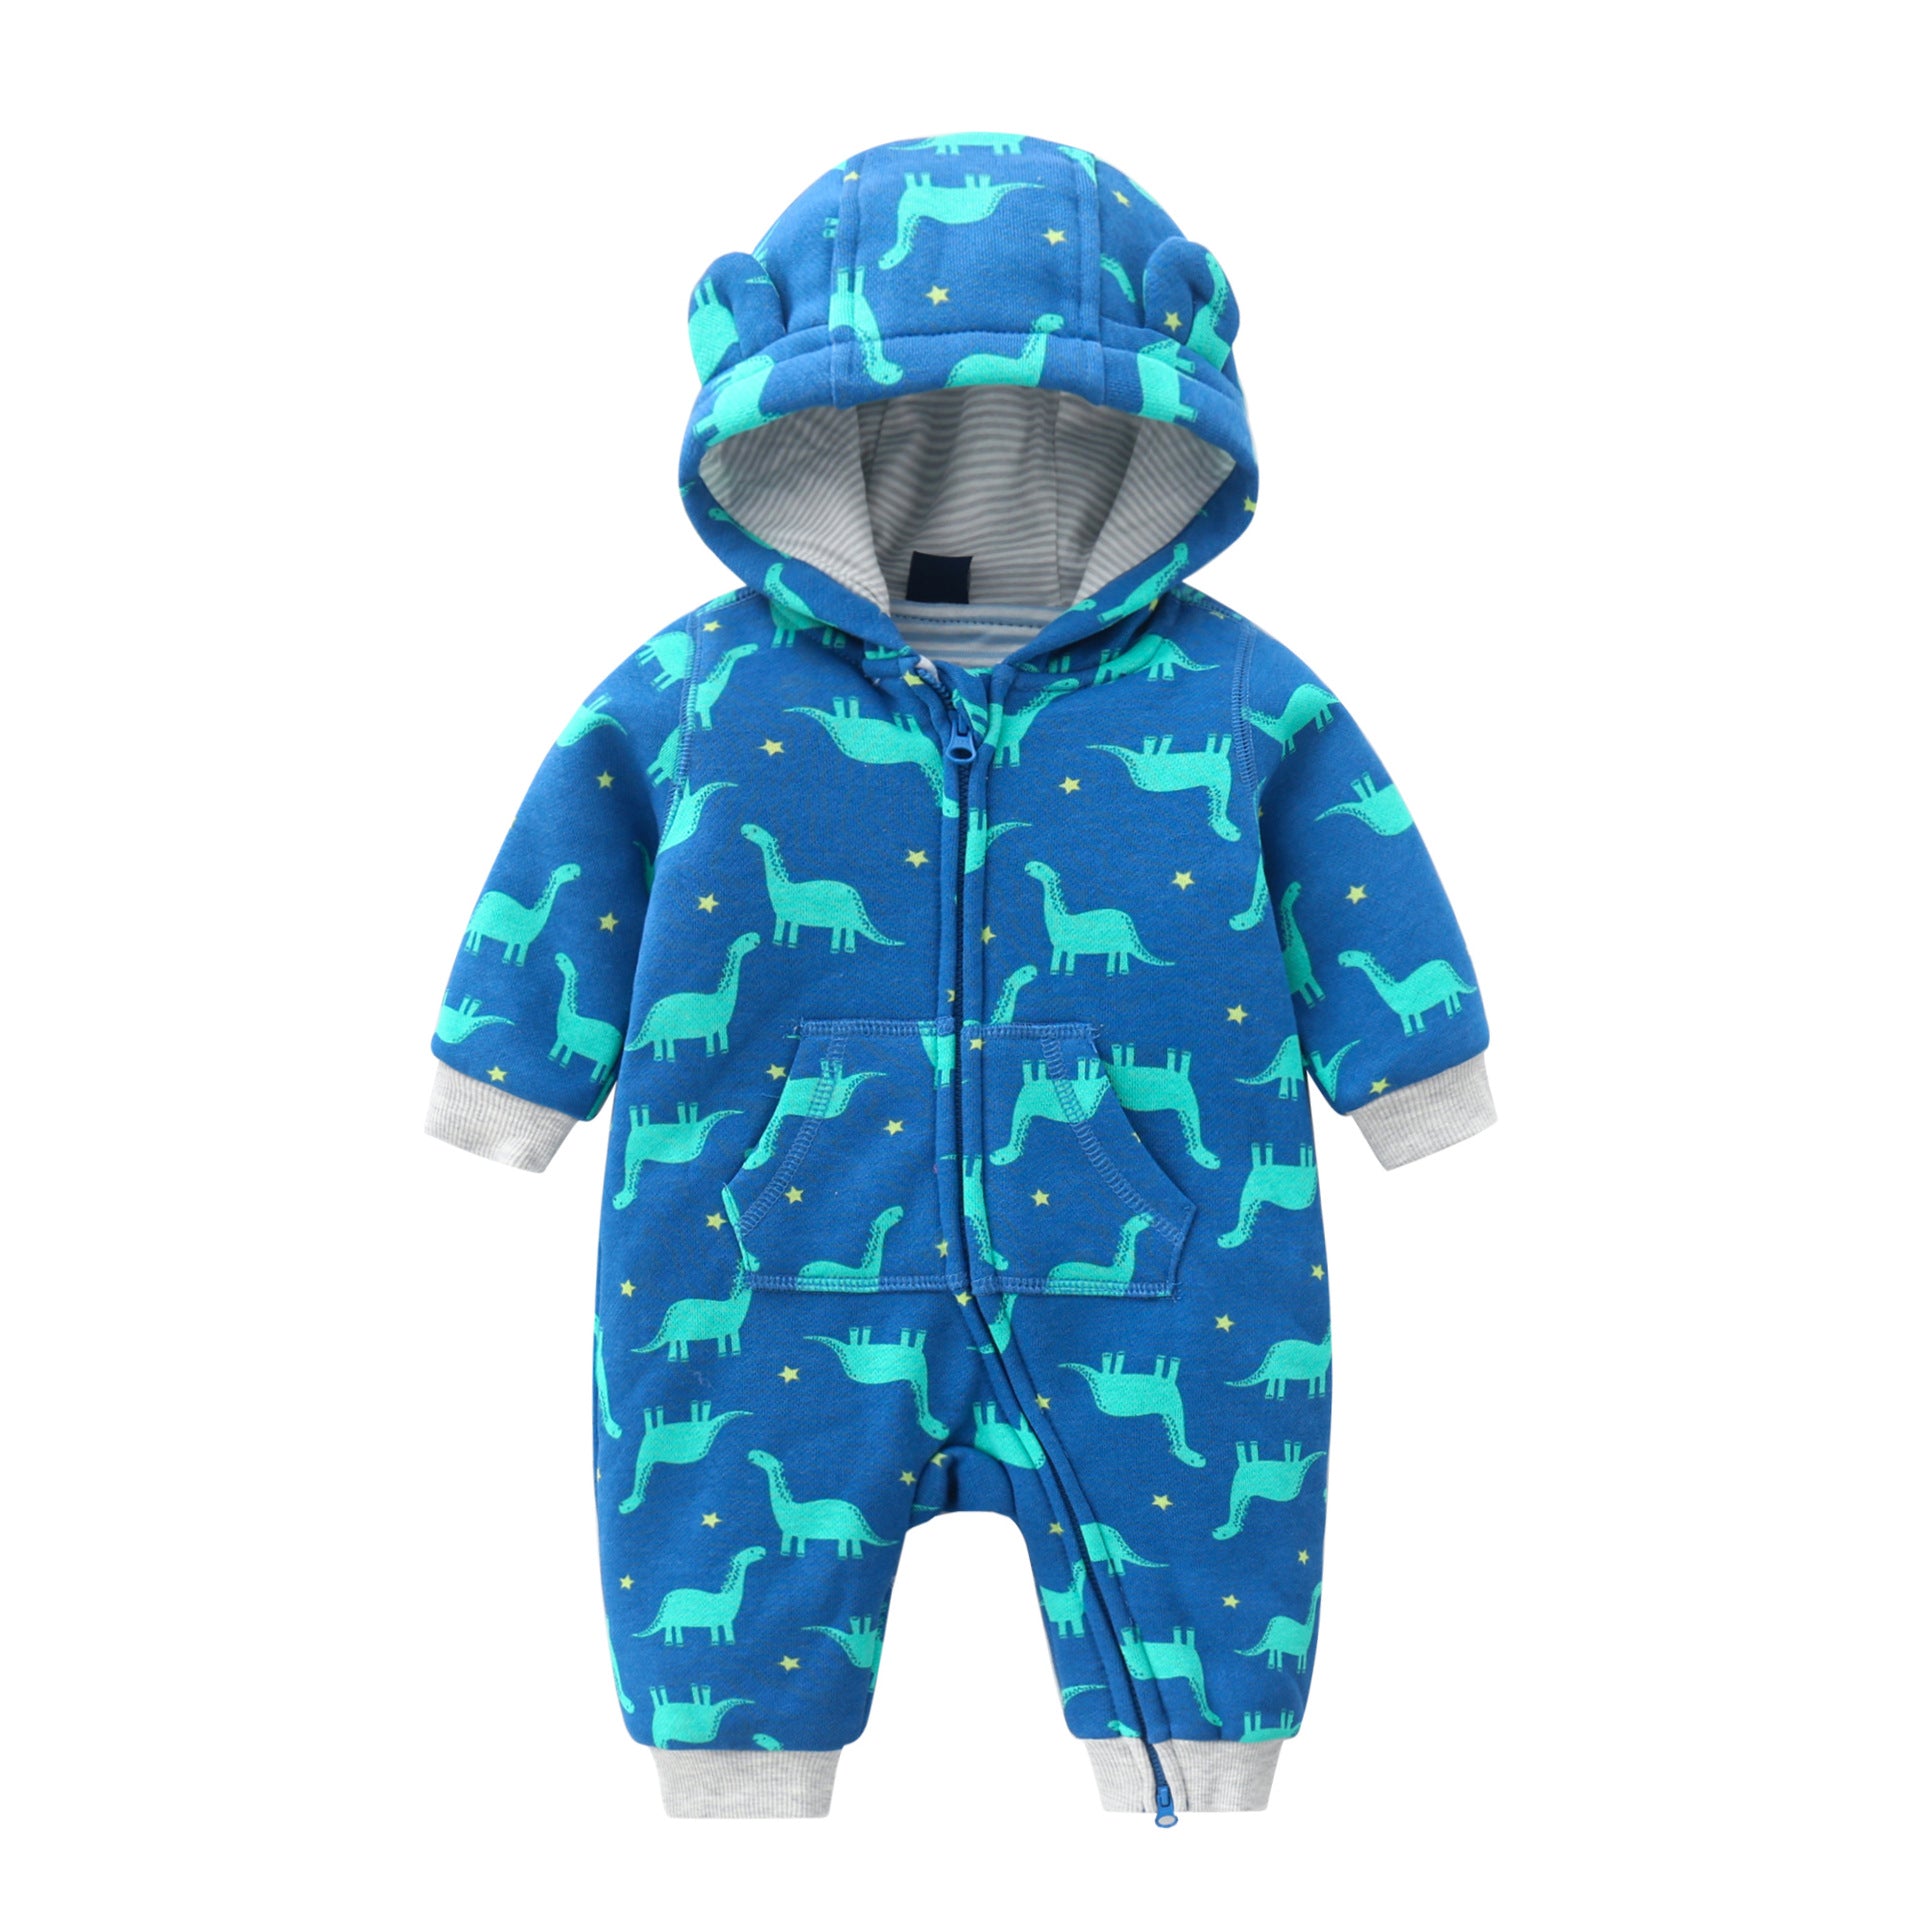 Baby and Toddler One-Piece Romper - Blue dinosaur